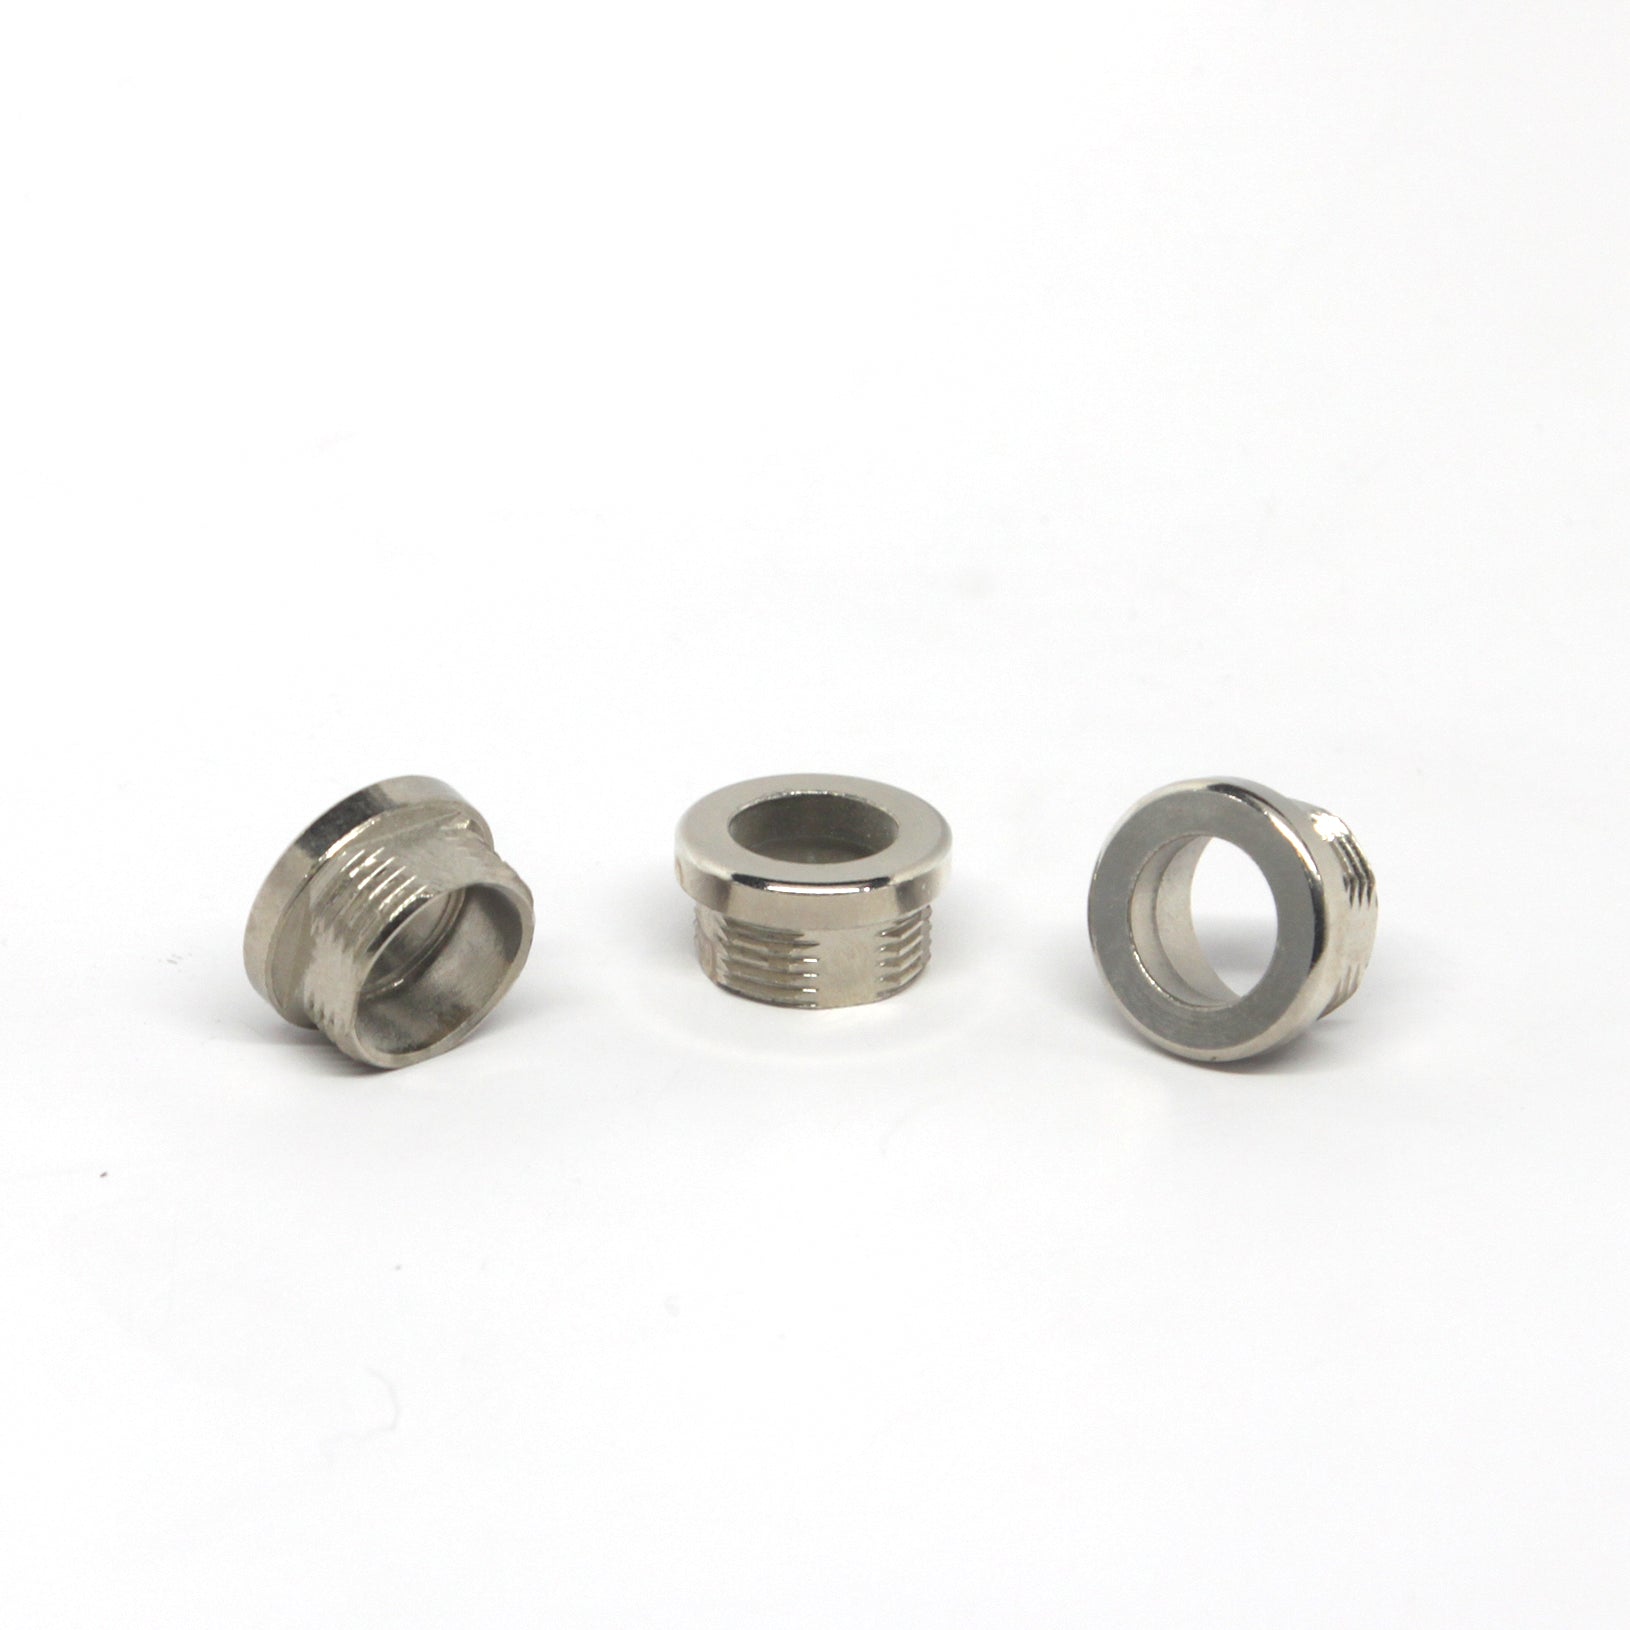 P498410 - Beauty Ring for Saniwave/Solidwave Pushbutton Intersan/AquaDesign